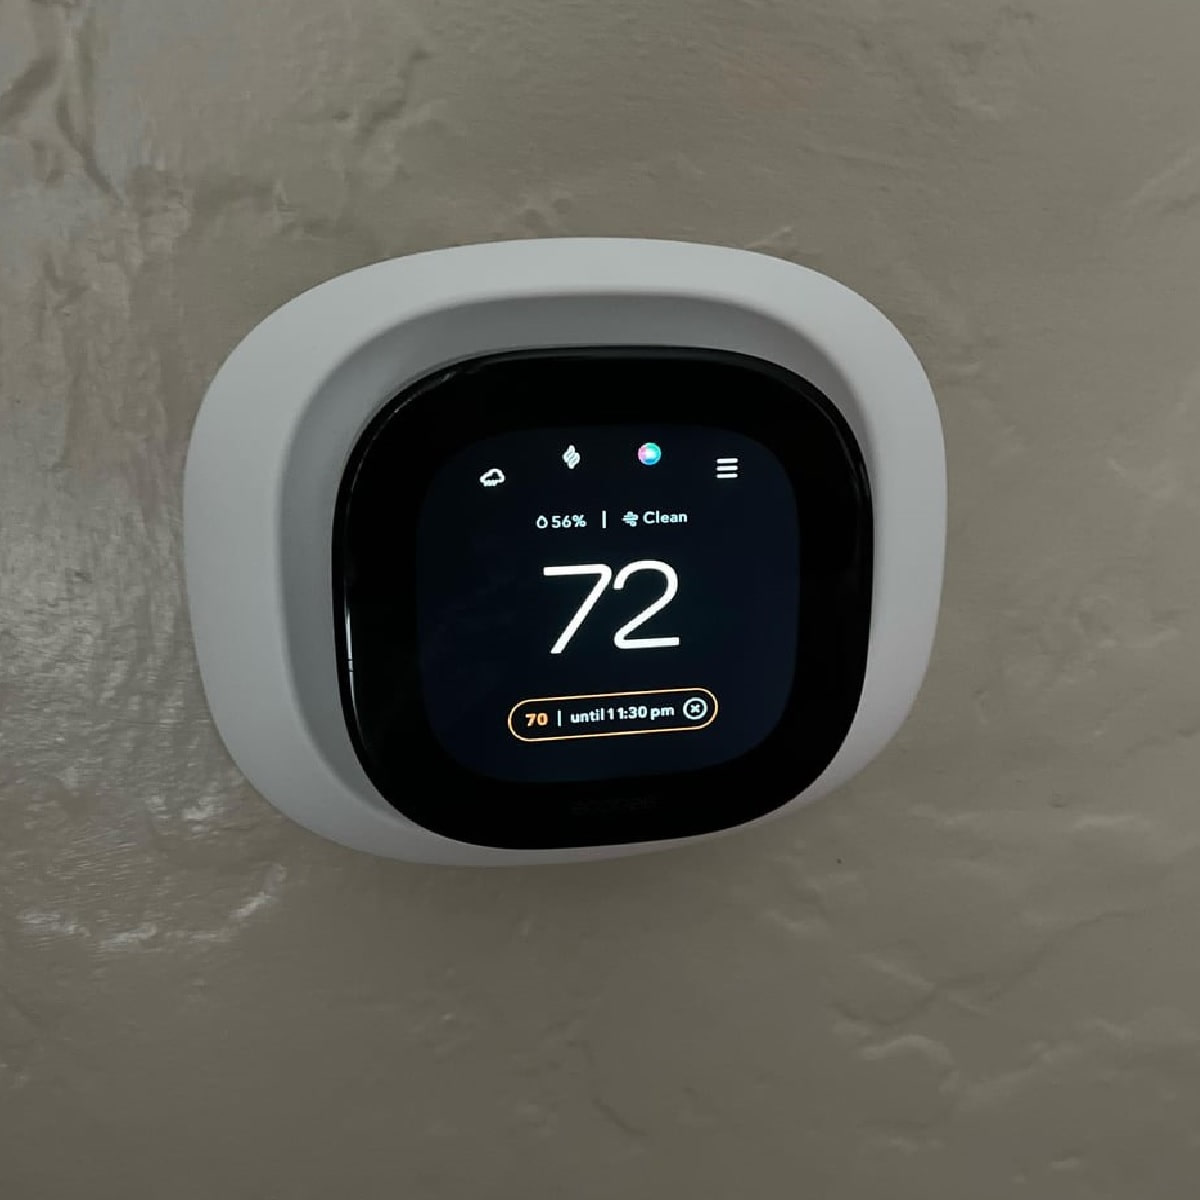 Ecobee thermostat not responding to touch